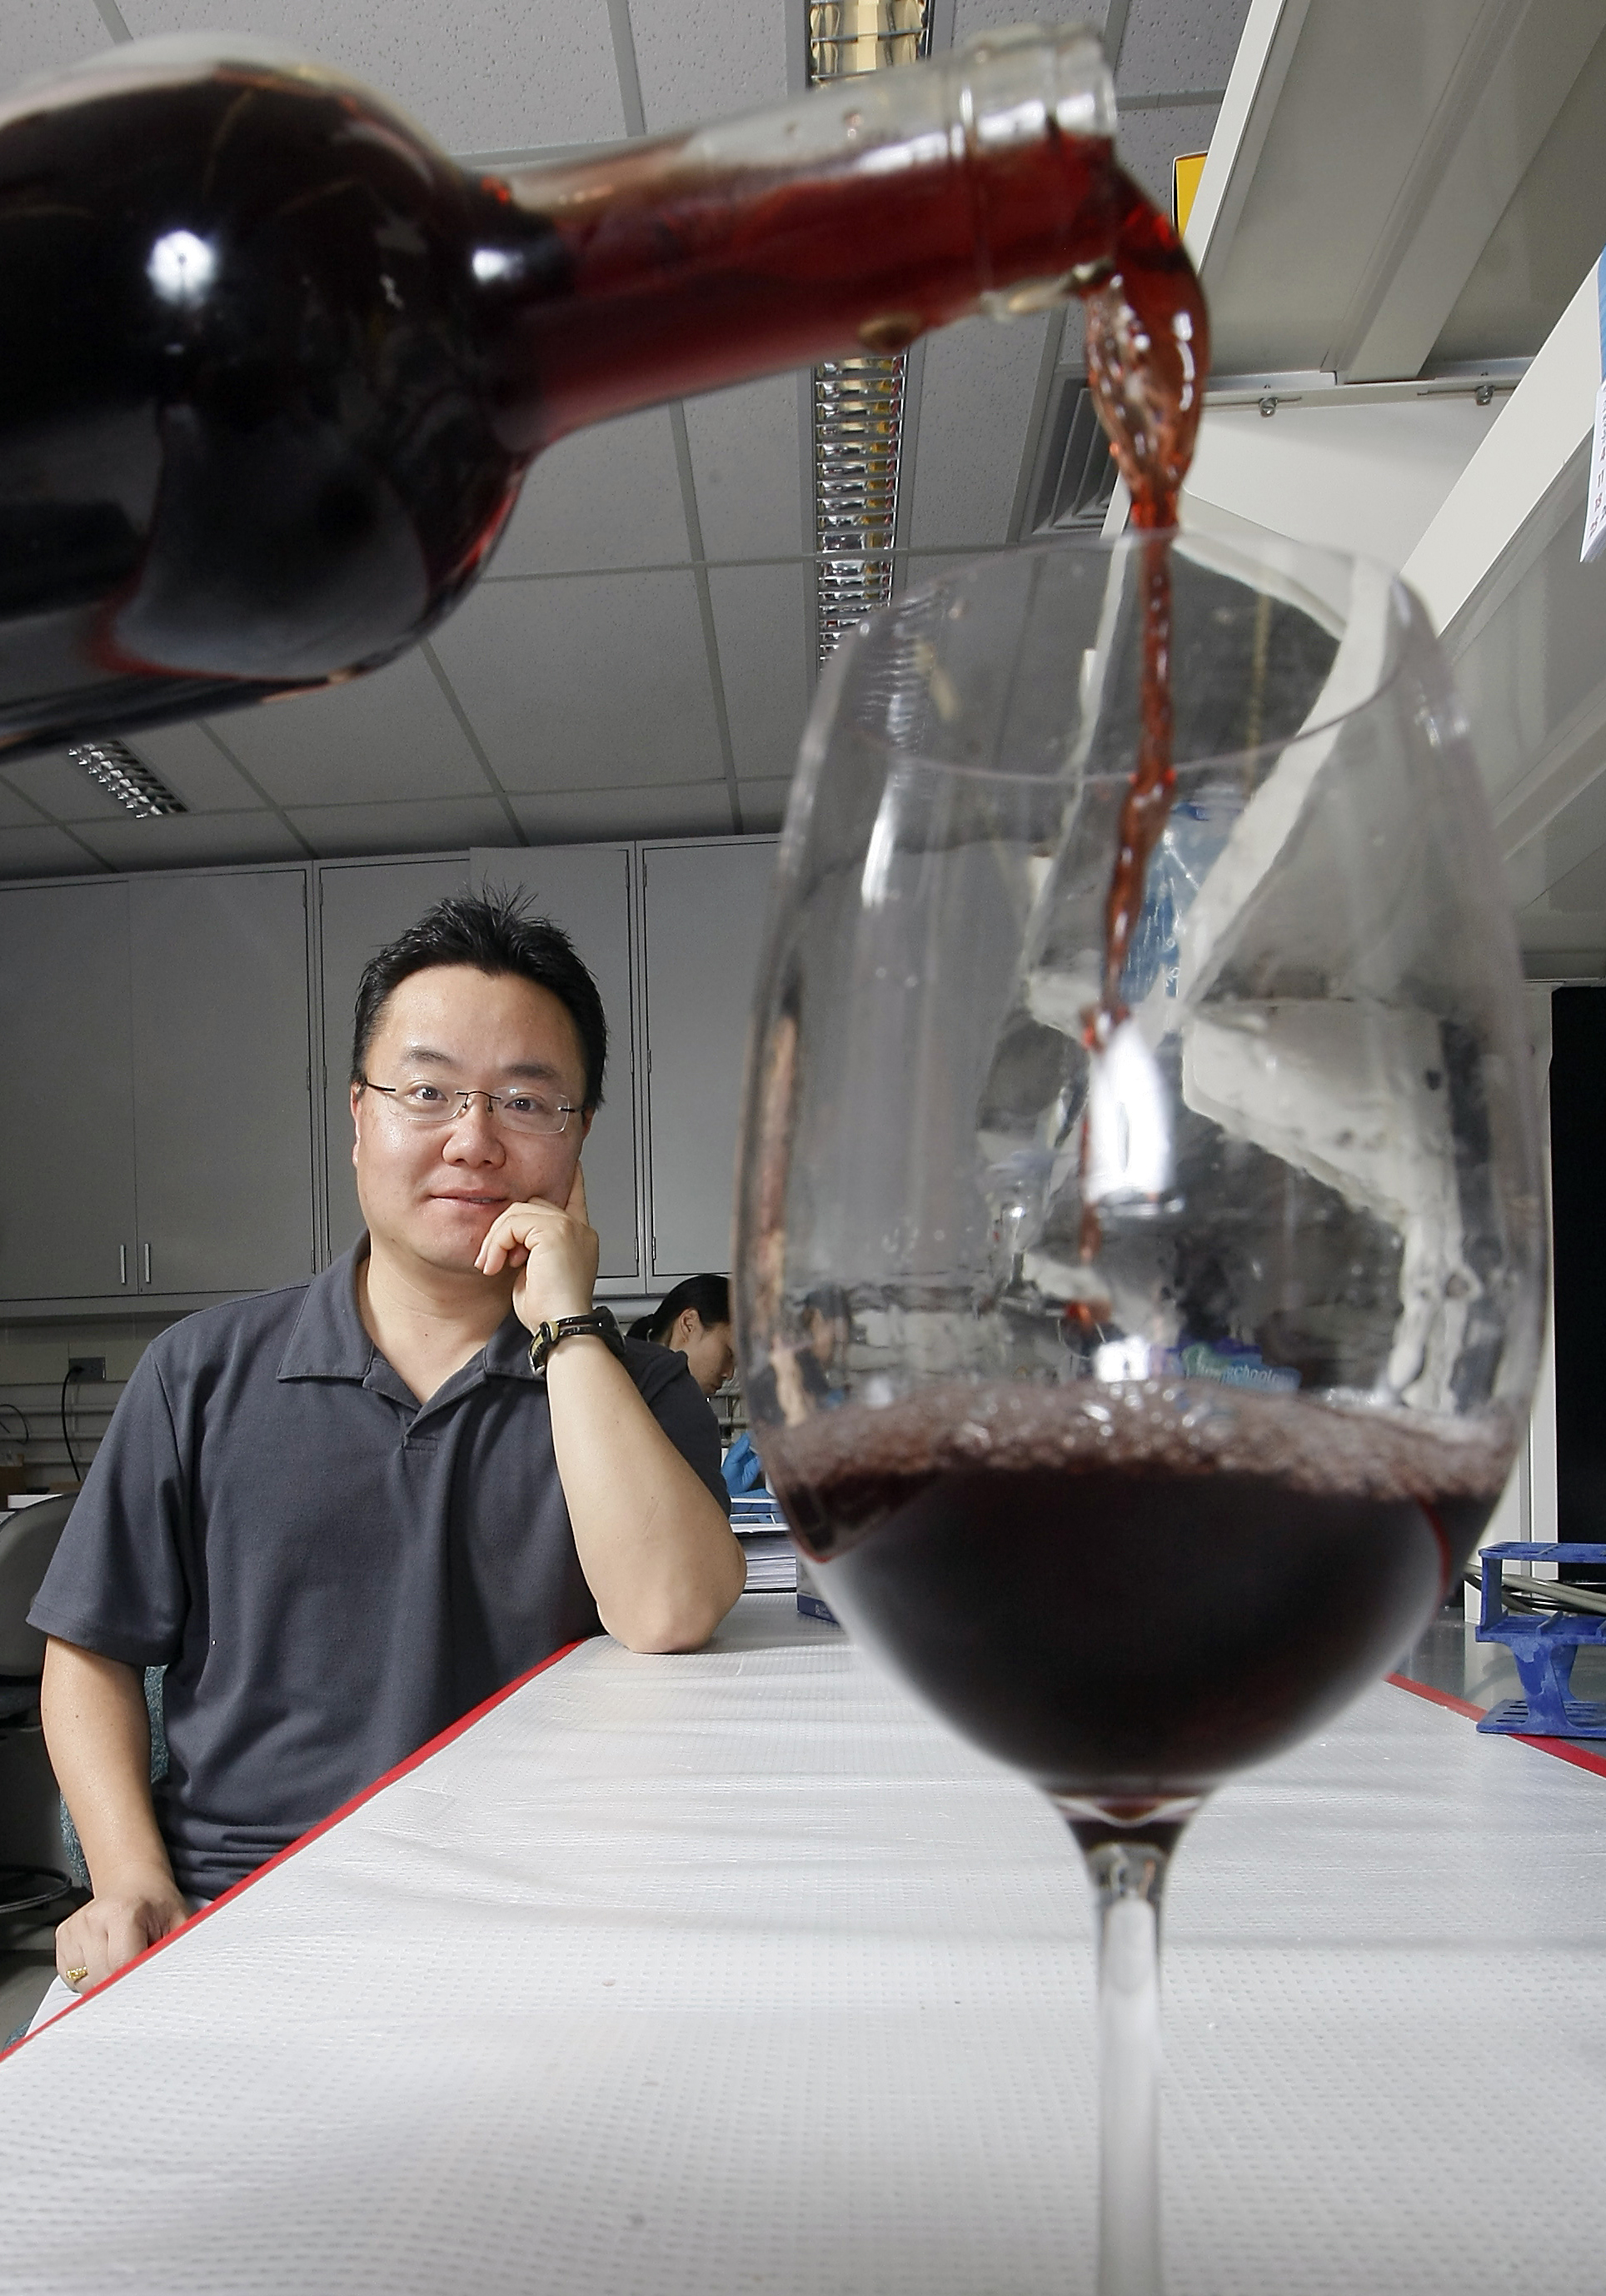 Red wine, fruit compound could help fight obesity